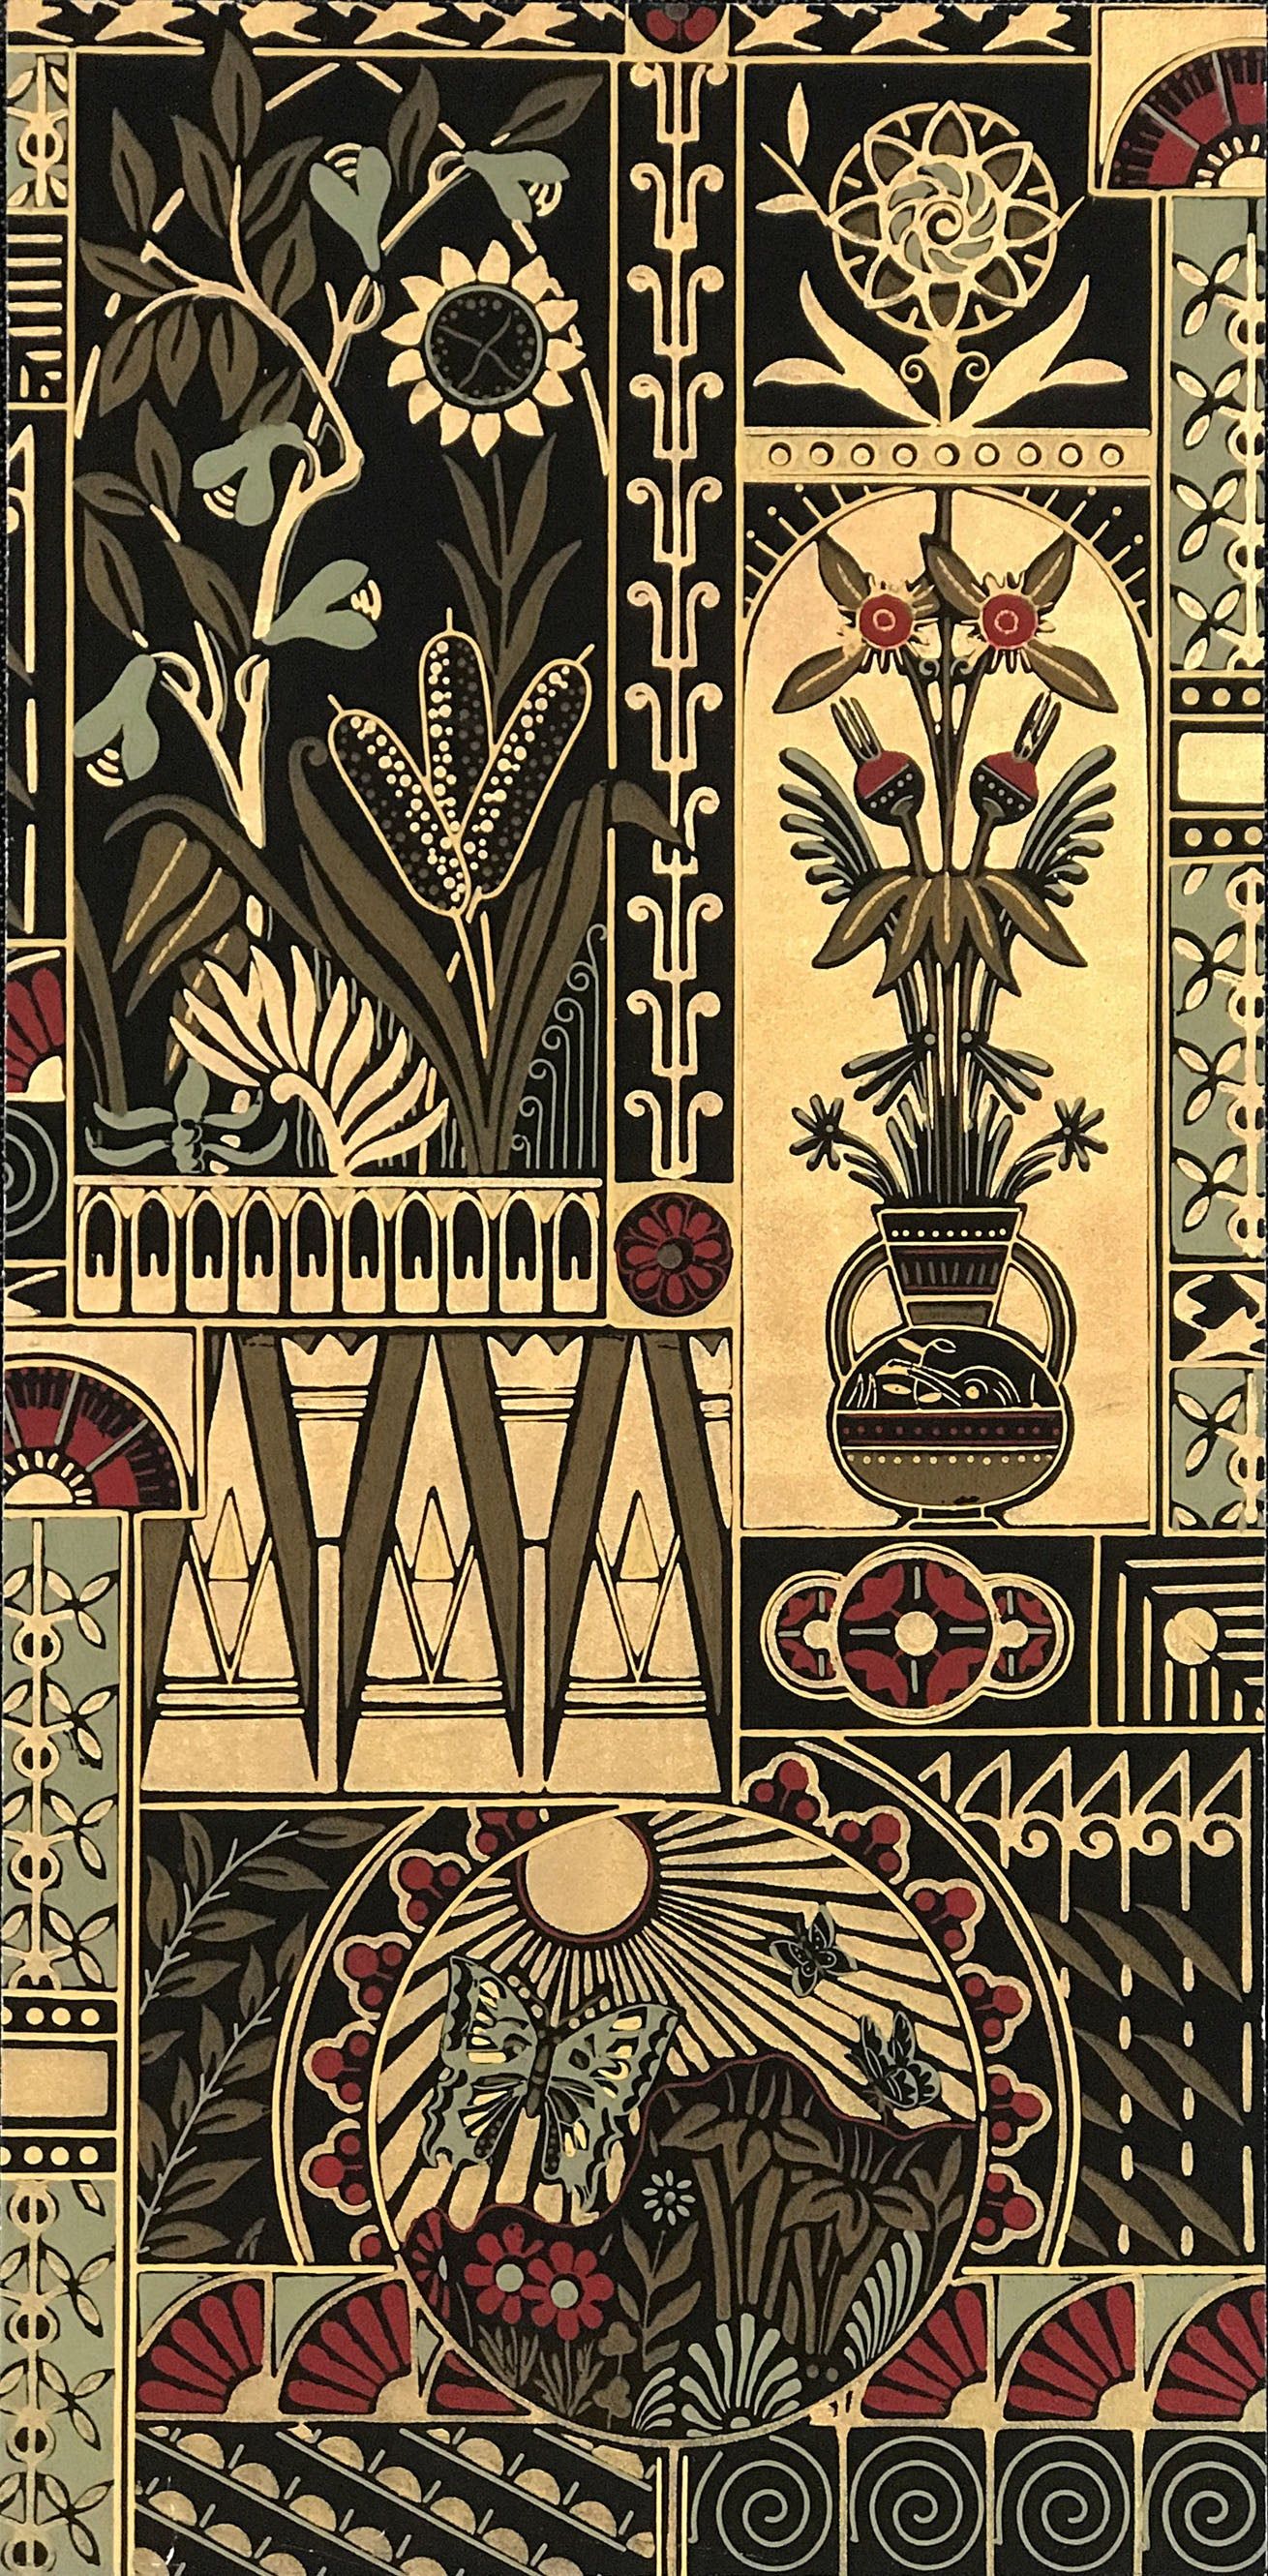 A pattern of flowers and geometric shapes in black, gold, and red. - Art